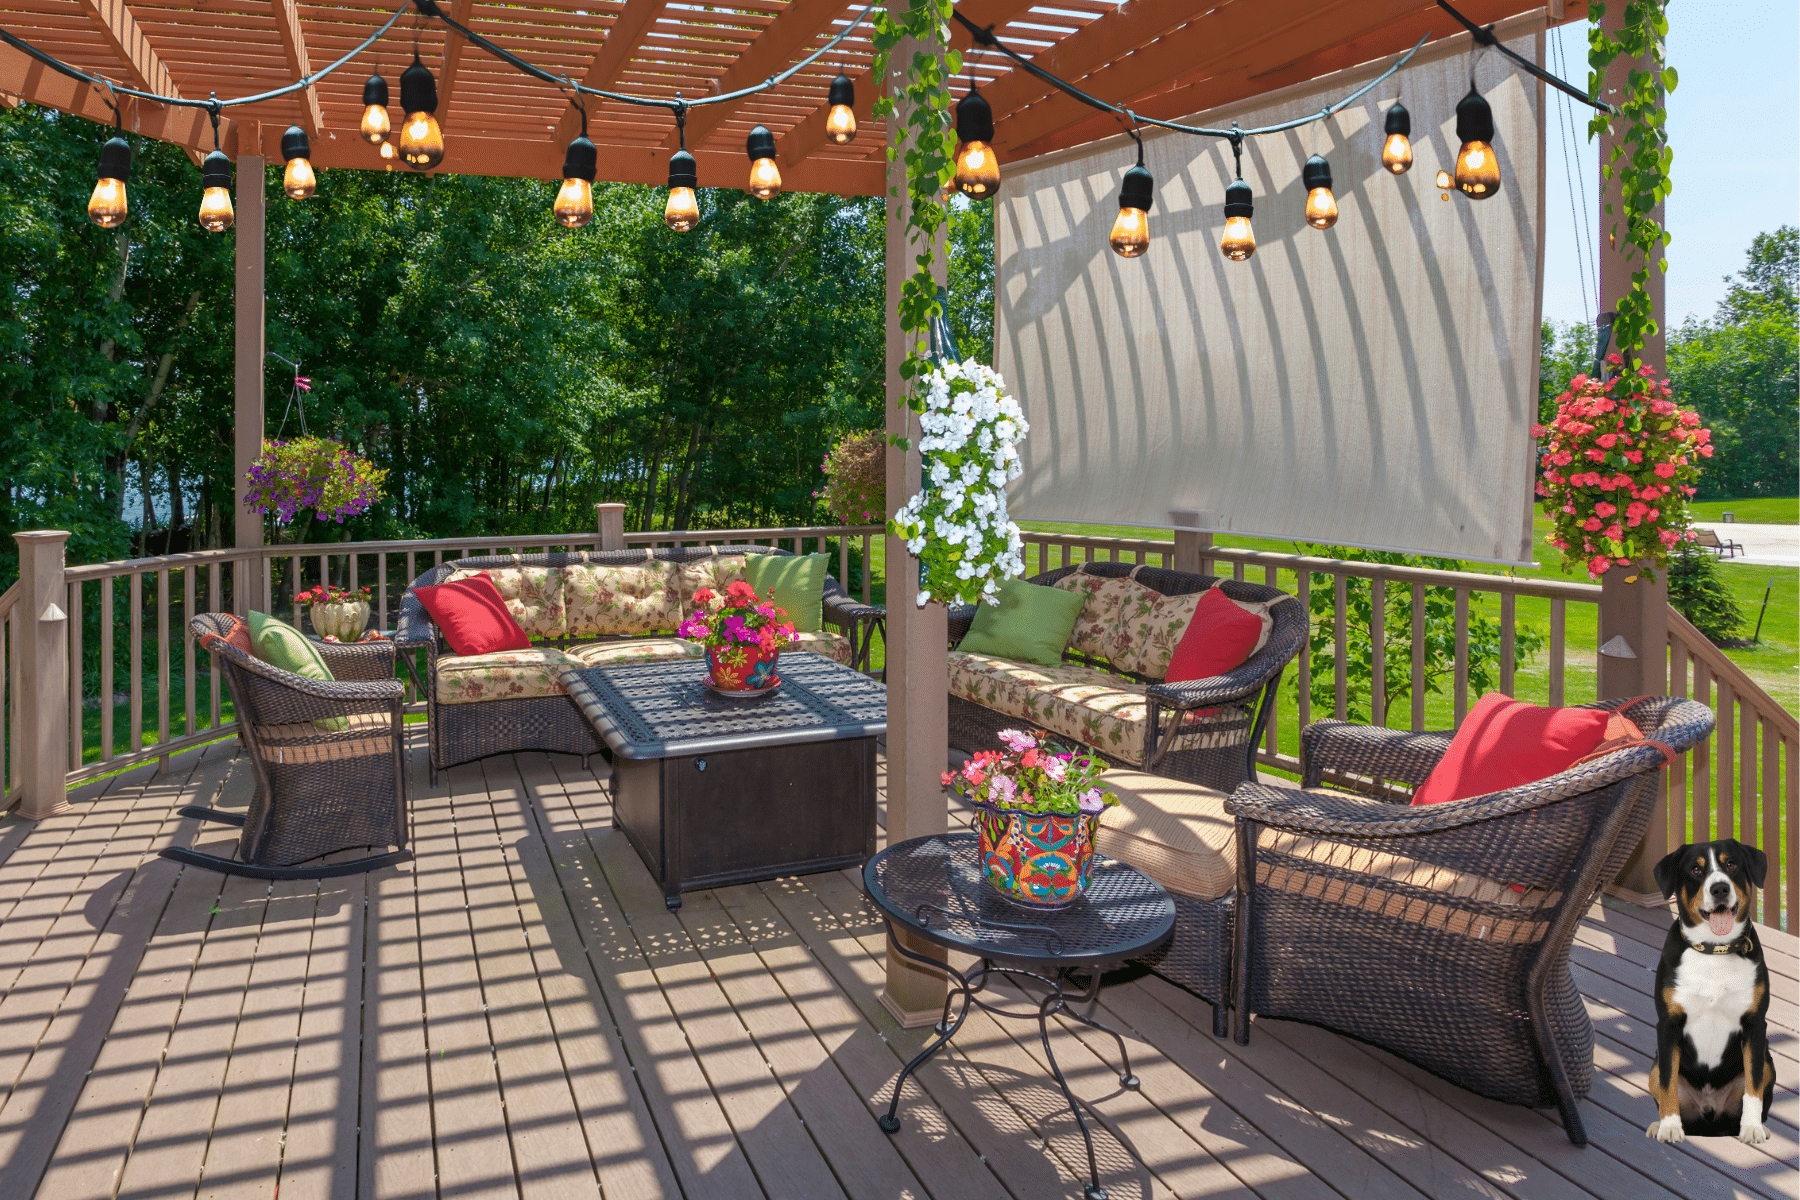 DIY Backyard Privacy Ideas for Patio and Deck with shade